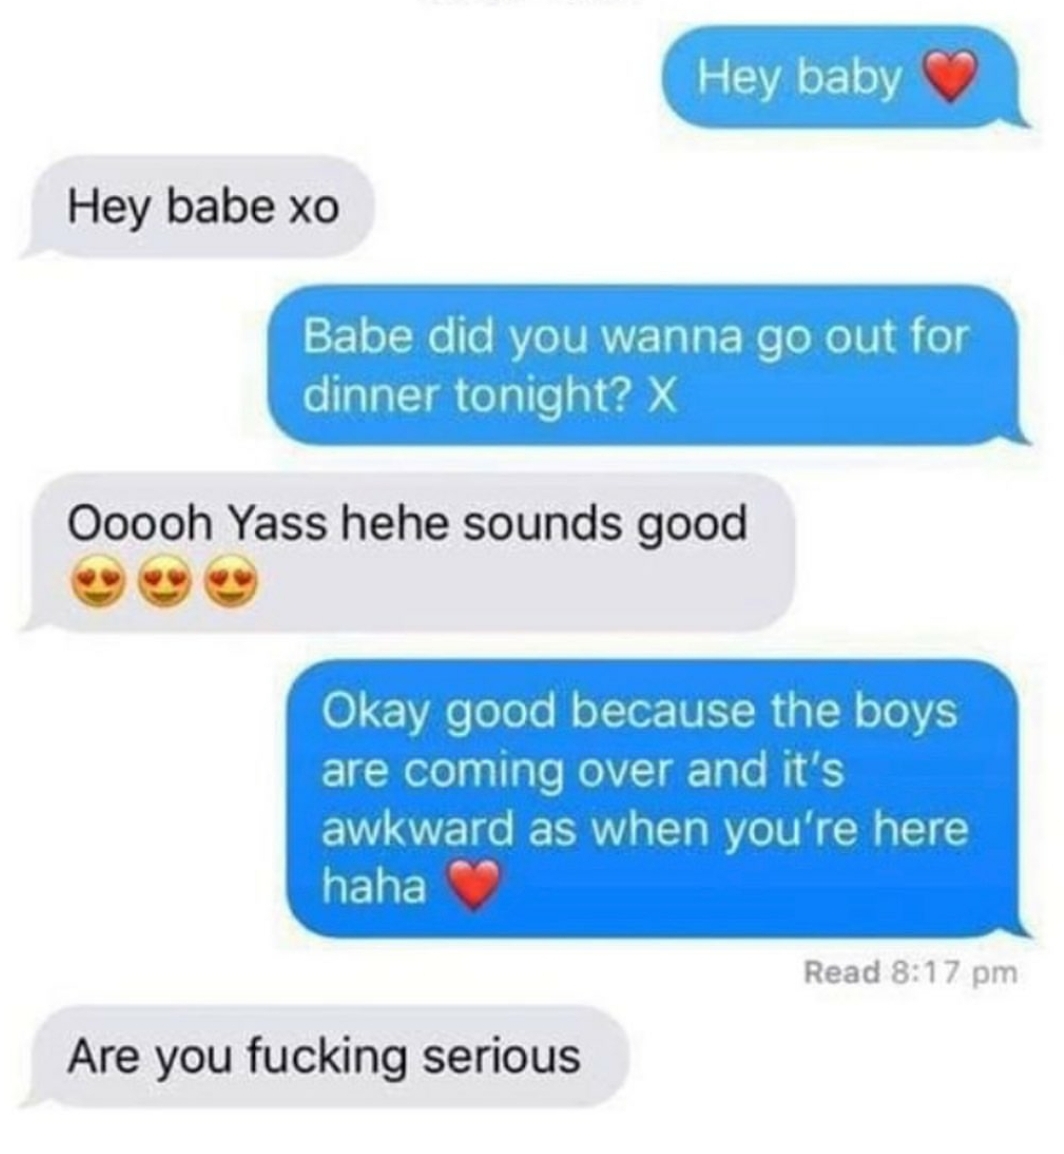 web page - Hey baby Hey babe xo Babe did you wanna go out for dinner tonight? X Ooooh Yass hehe sounds good Okay good because the boys are coming over and it's awkward as when you're here haha Read Are you fucking serious